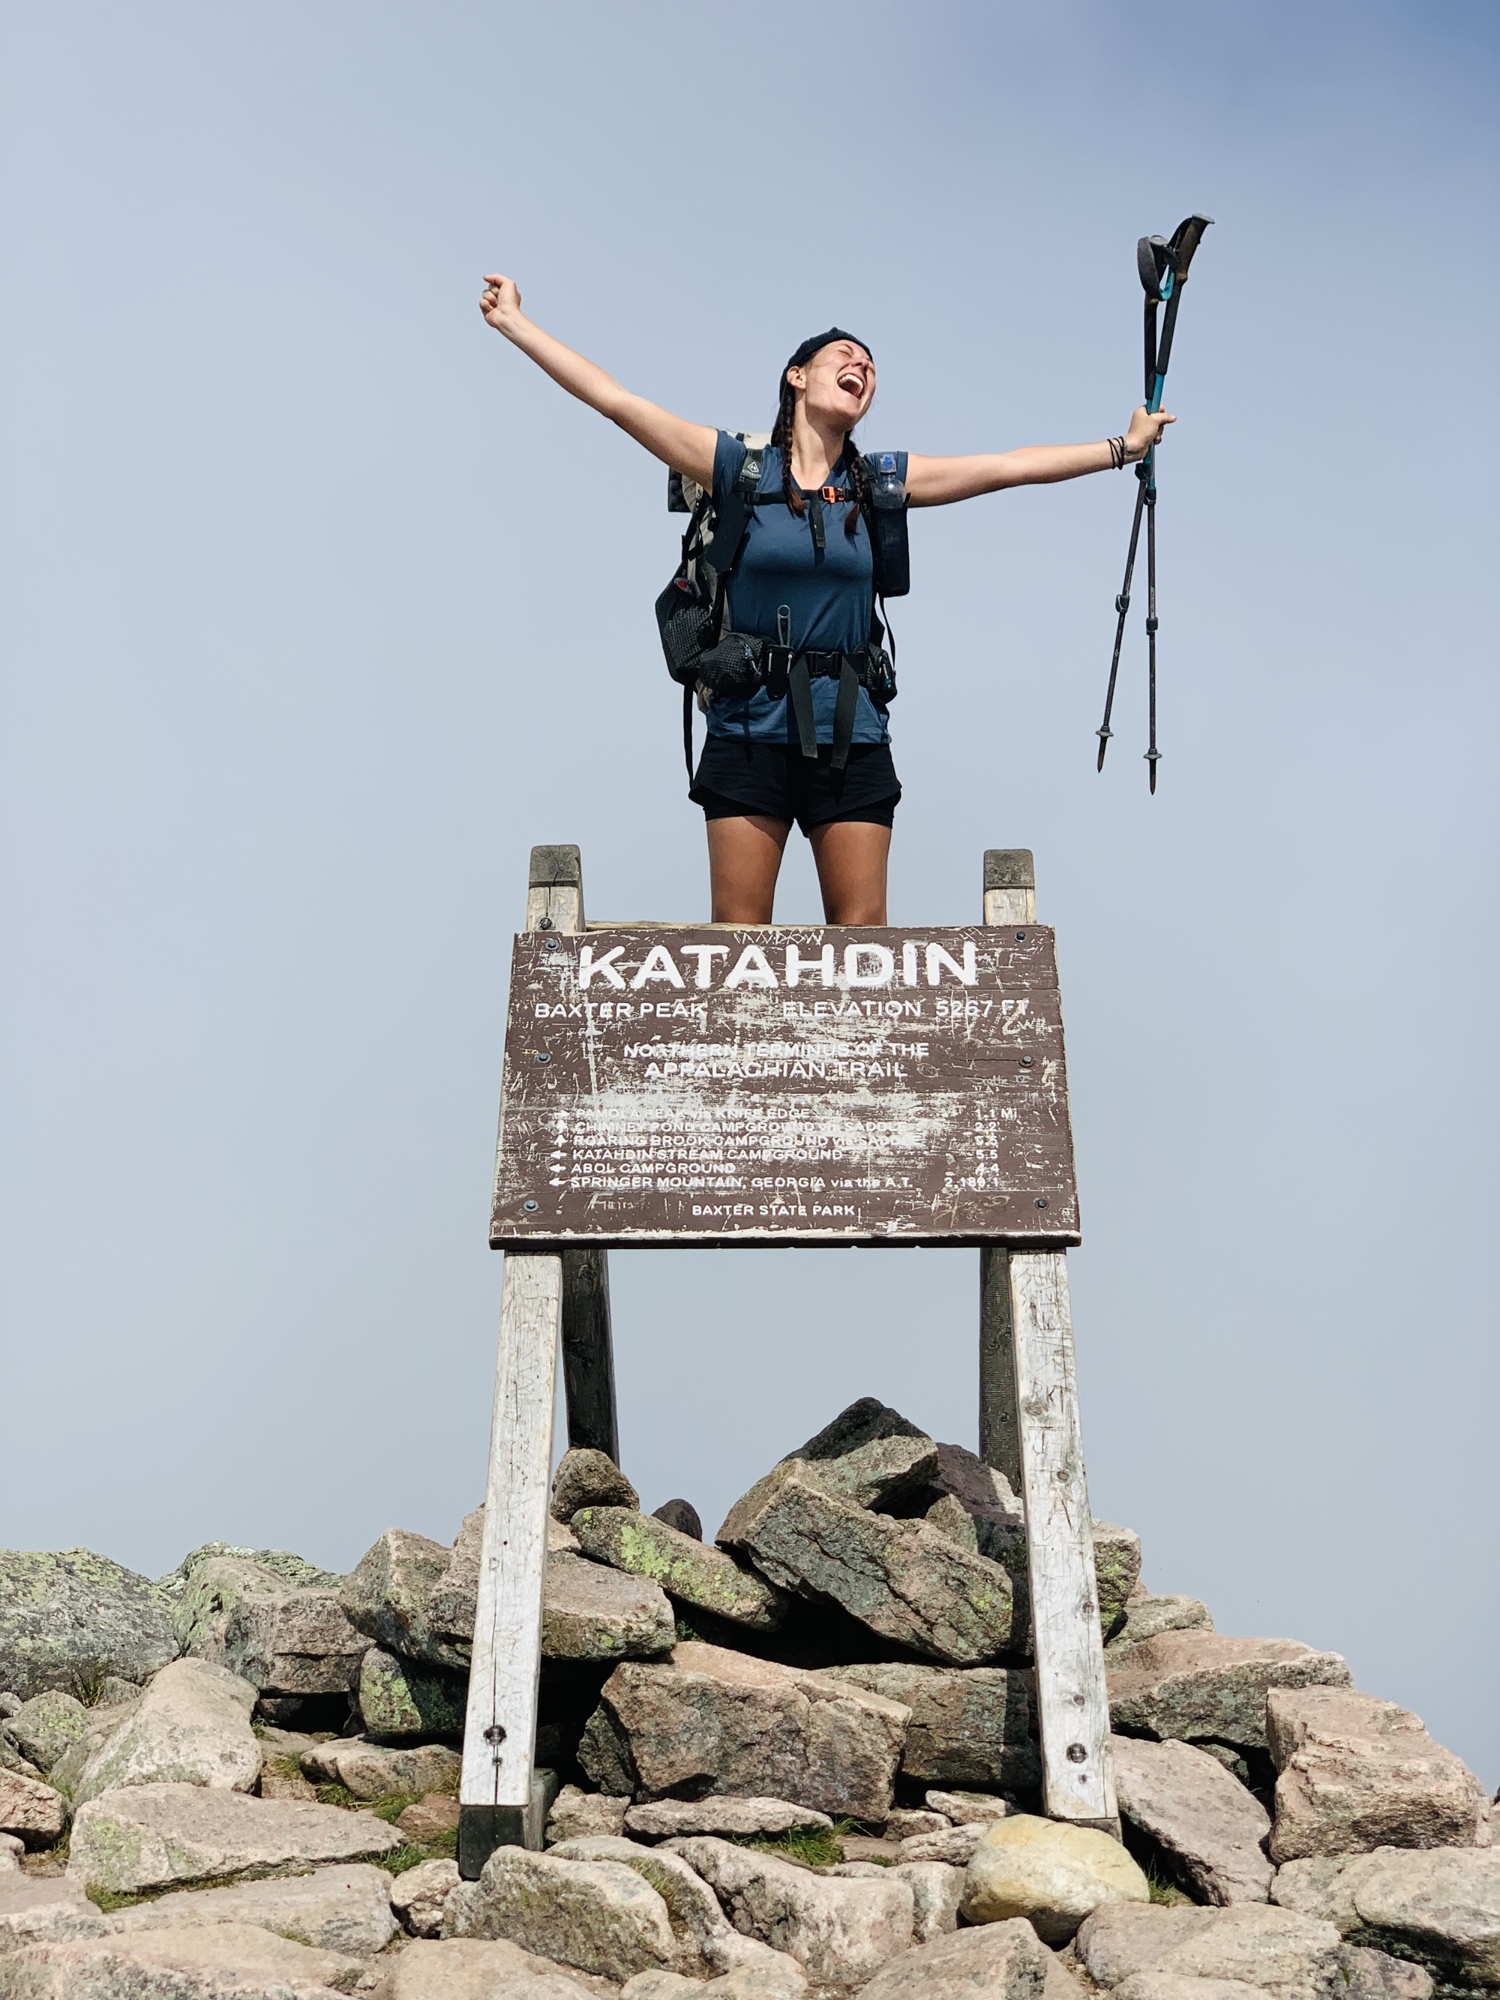 Tatum Temple lets out a scream of relief while standing at the peak of Mount Katahdin in Piscataquis, Maine. The peak marks the end of the Appalachian Trail. Photo courtesy Tatum Temple.